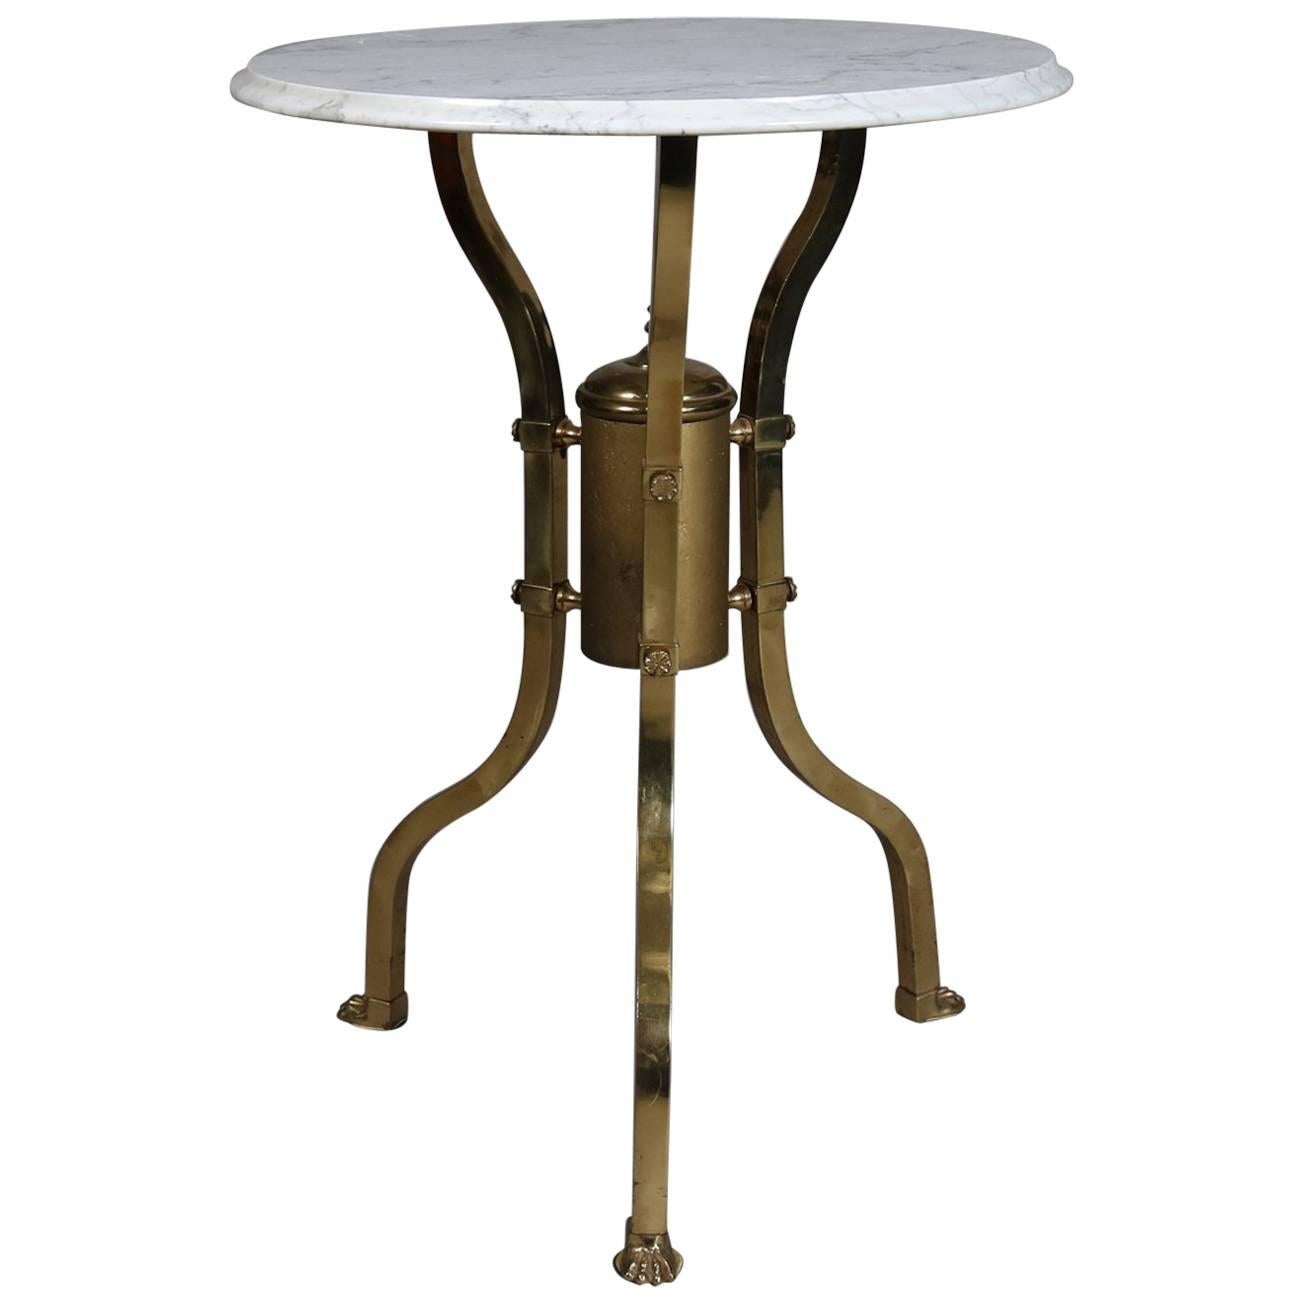 Aesthetic Movement Brass and Marble Round Parlor Table, Paw Feet, Made in Italy